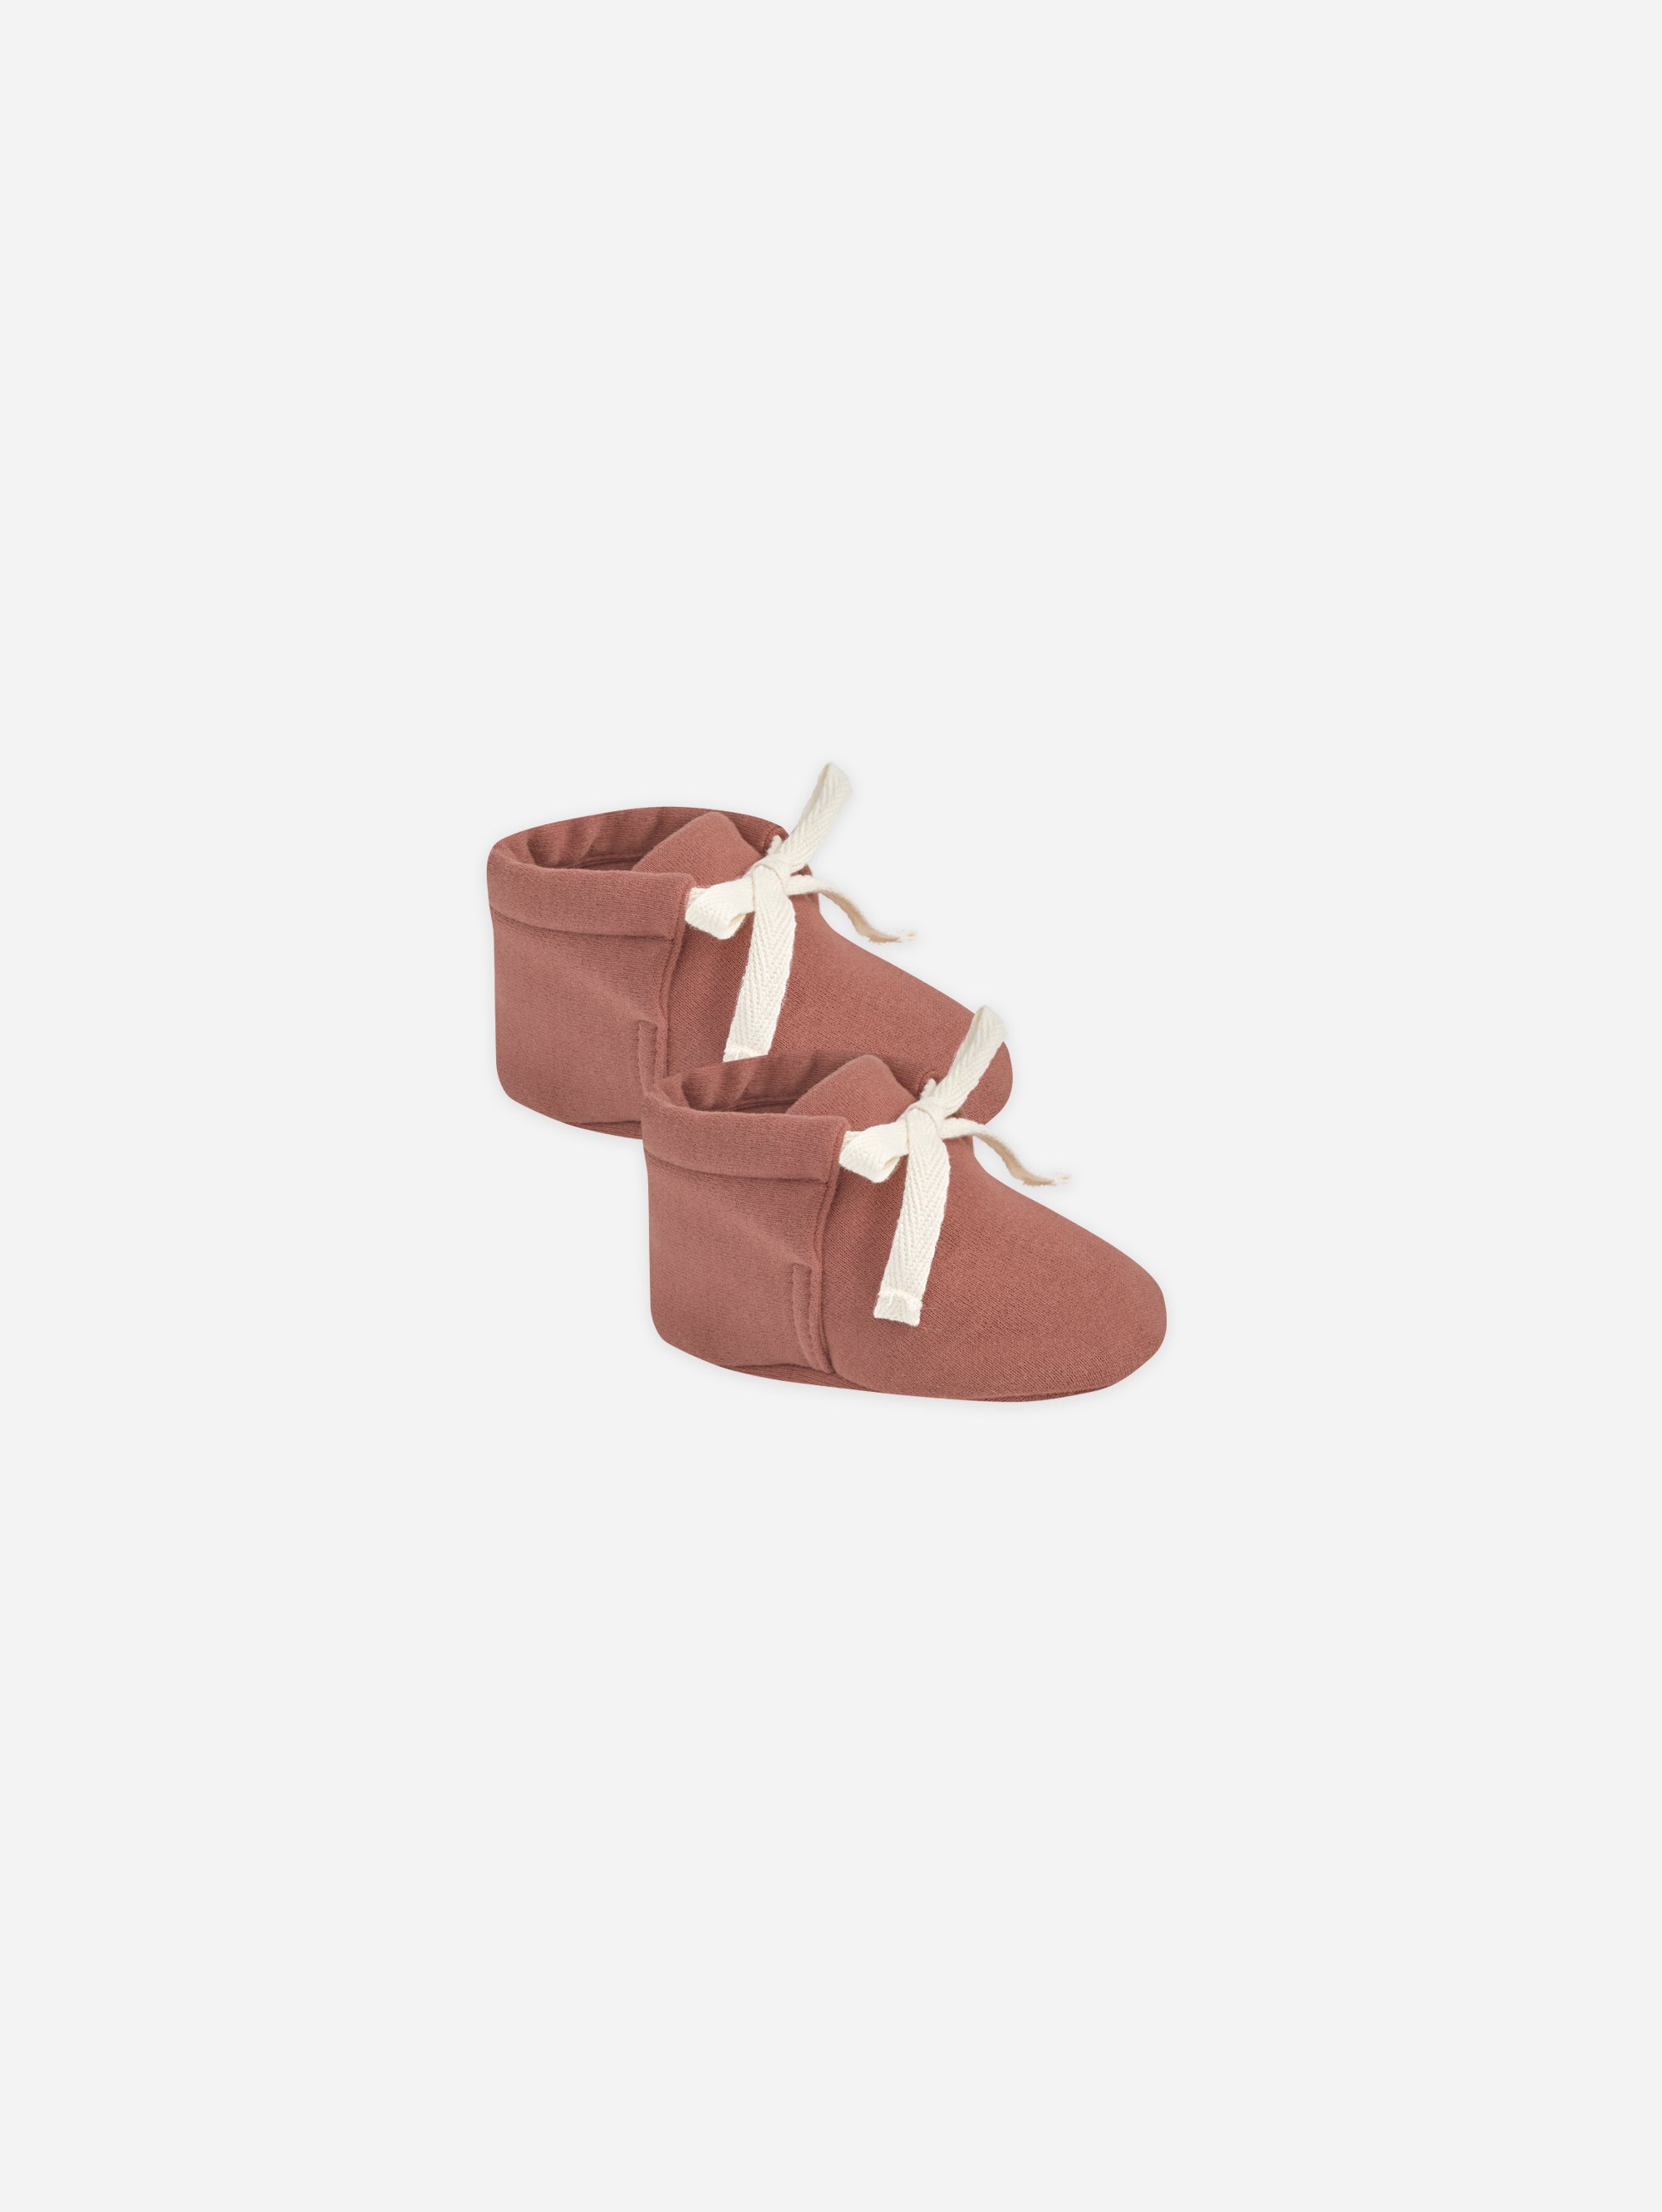 Baby Booties || Berry - Rylee + Cru | Kids Clothes | Trendy Baby Clothes | Modern Infant Outfits |